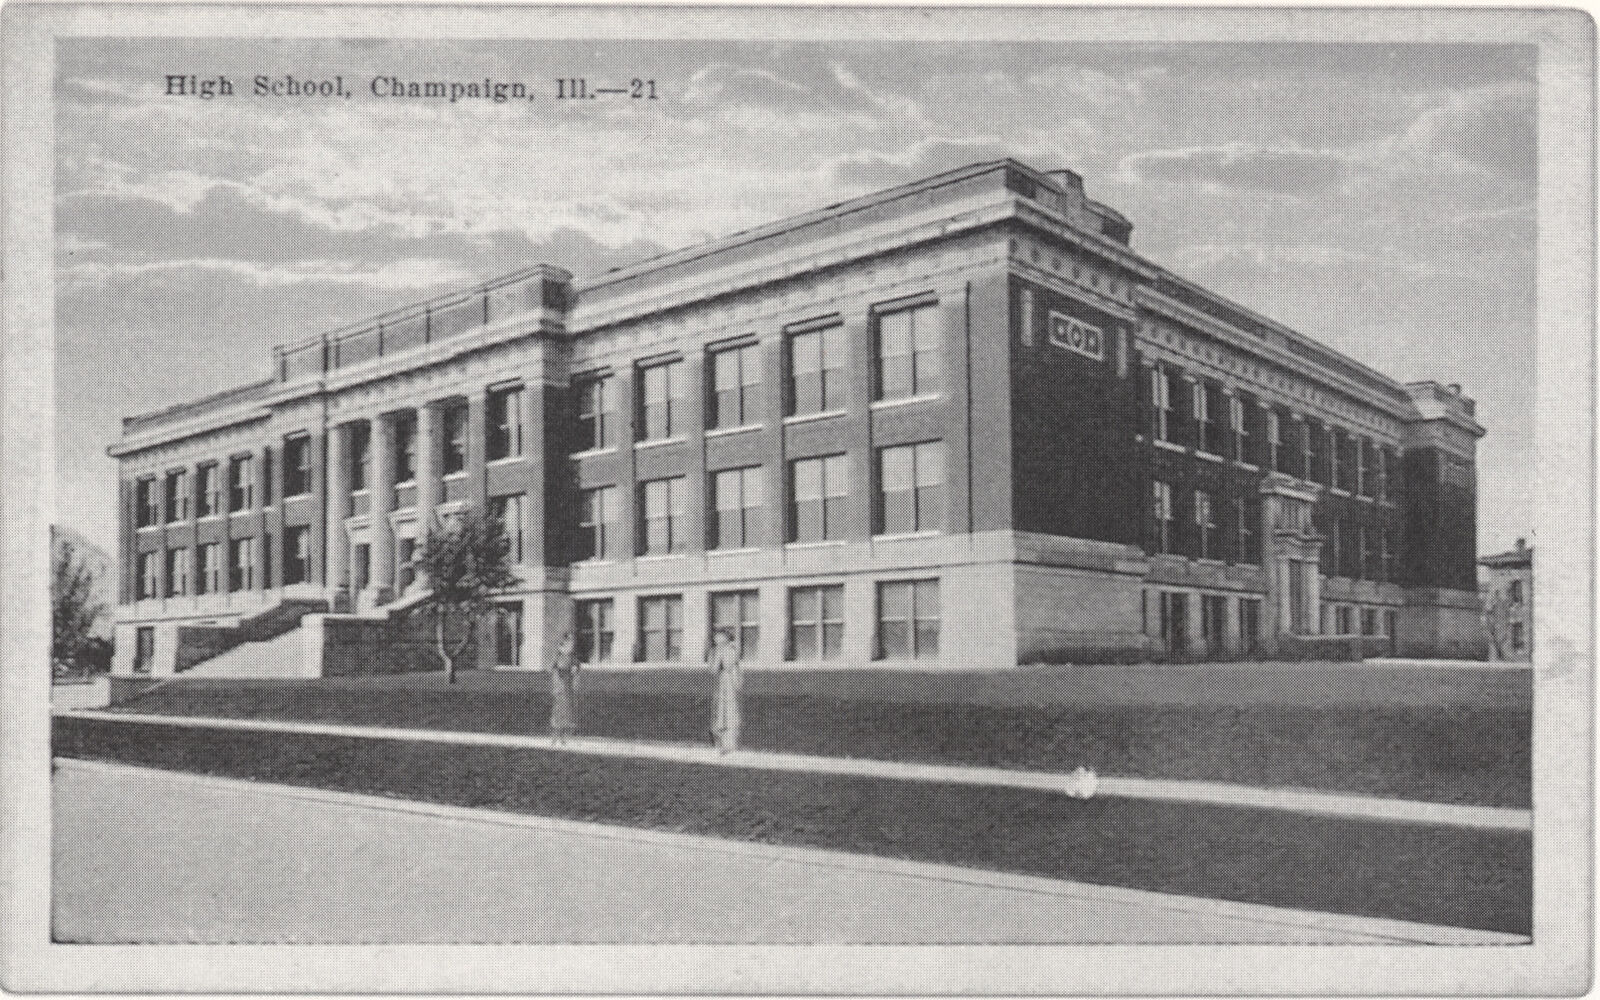 High School, Champaign, Illinois | Digital Collections at the